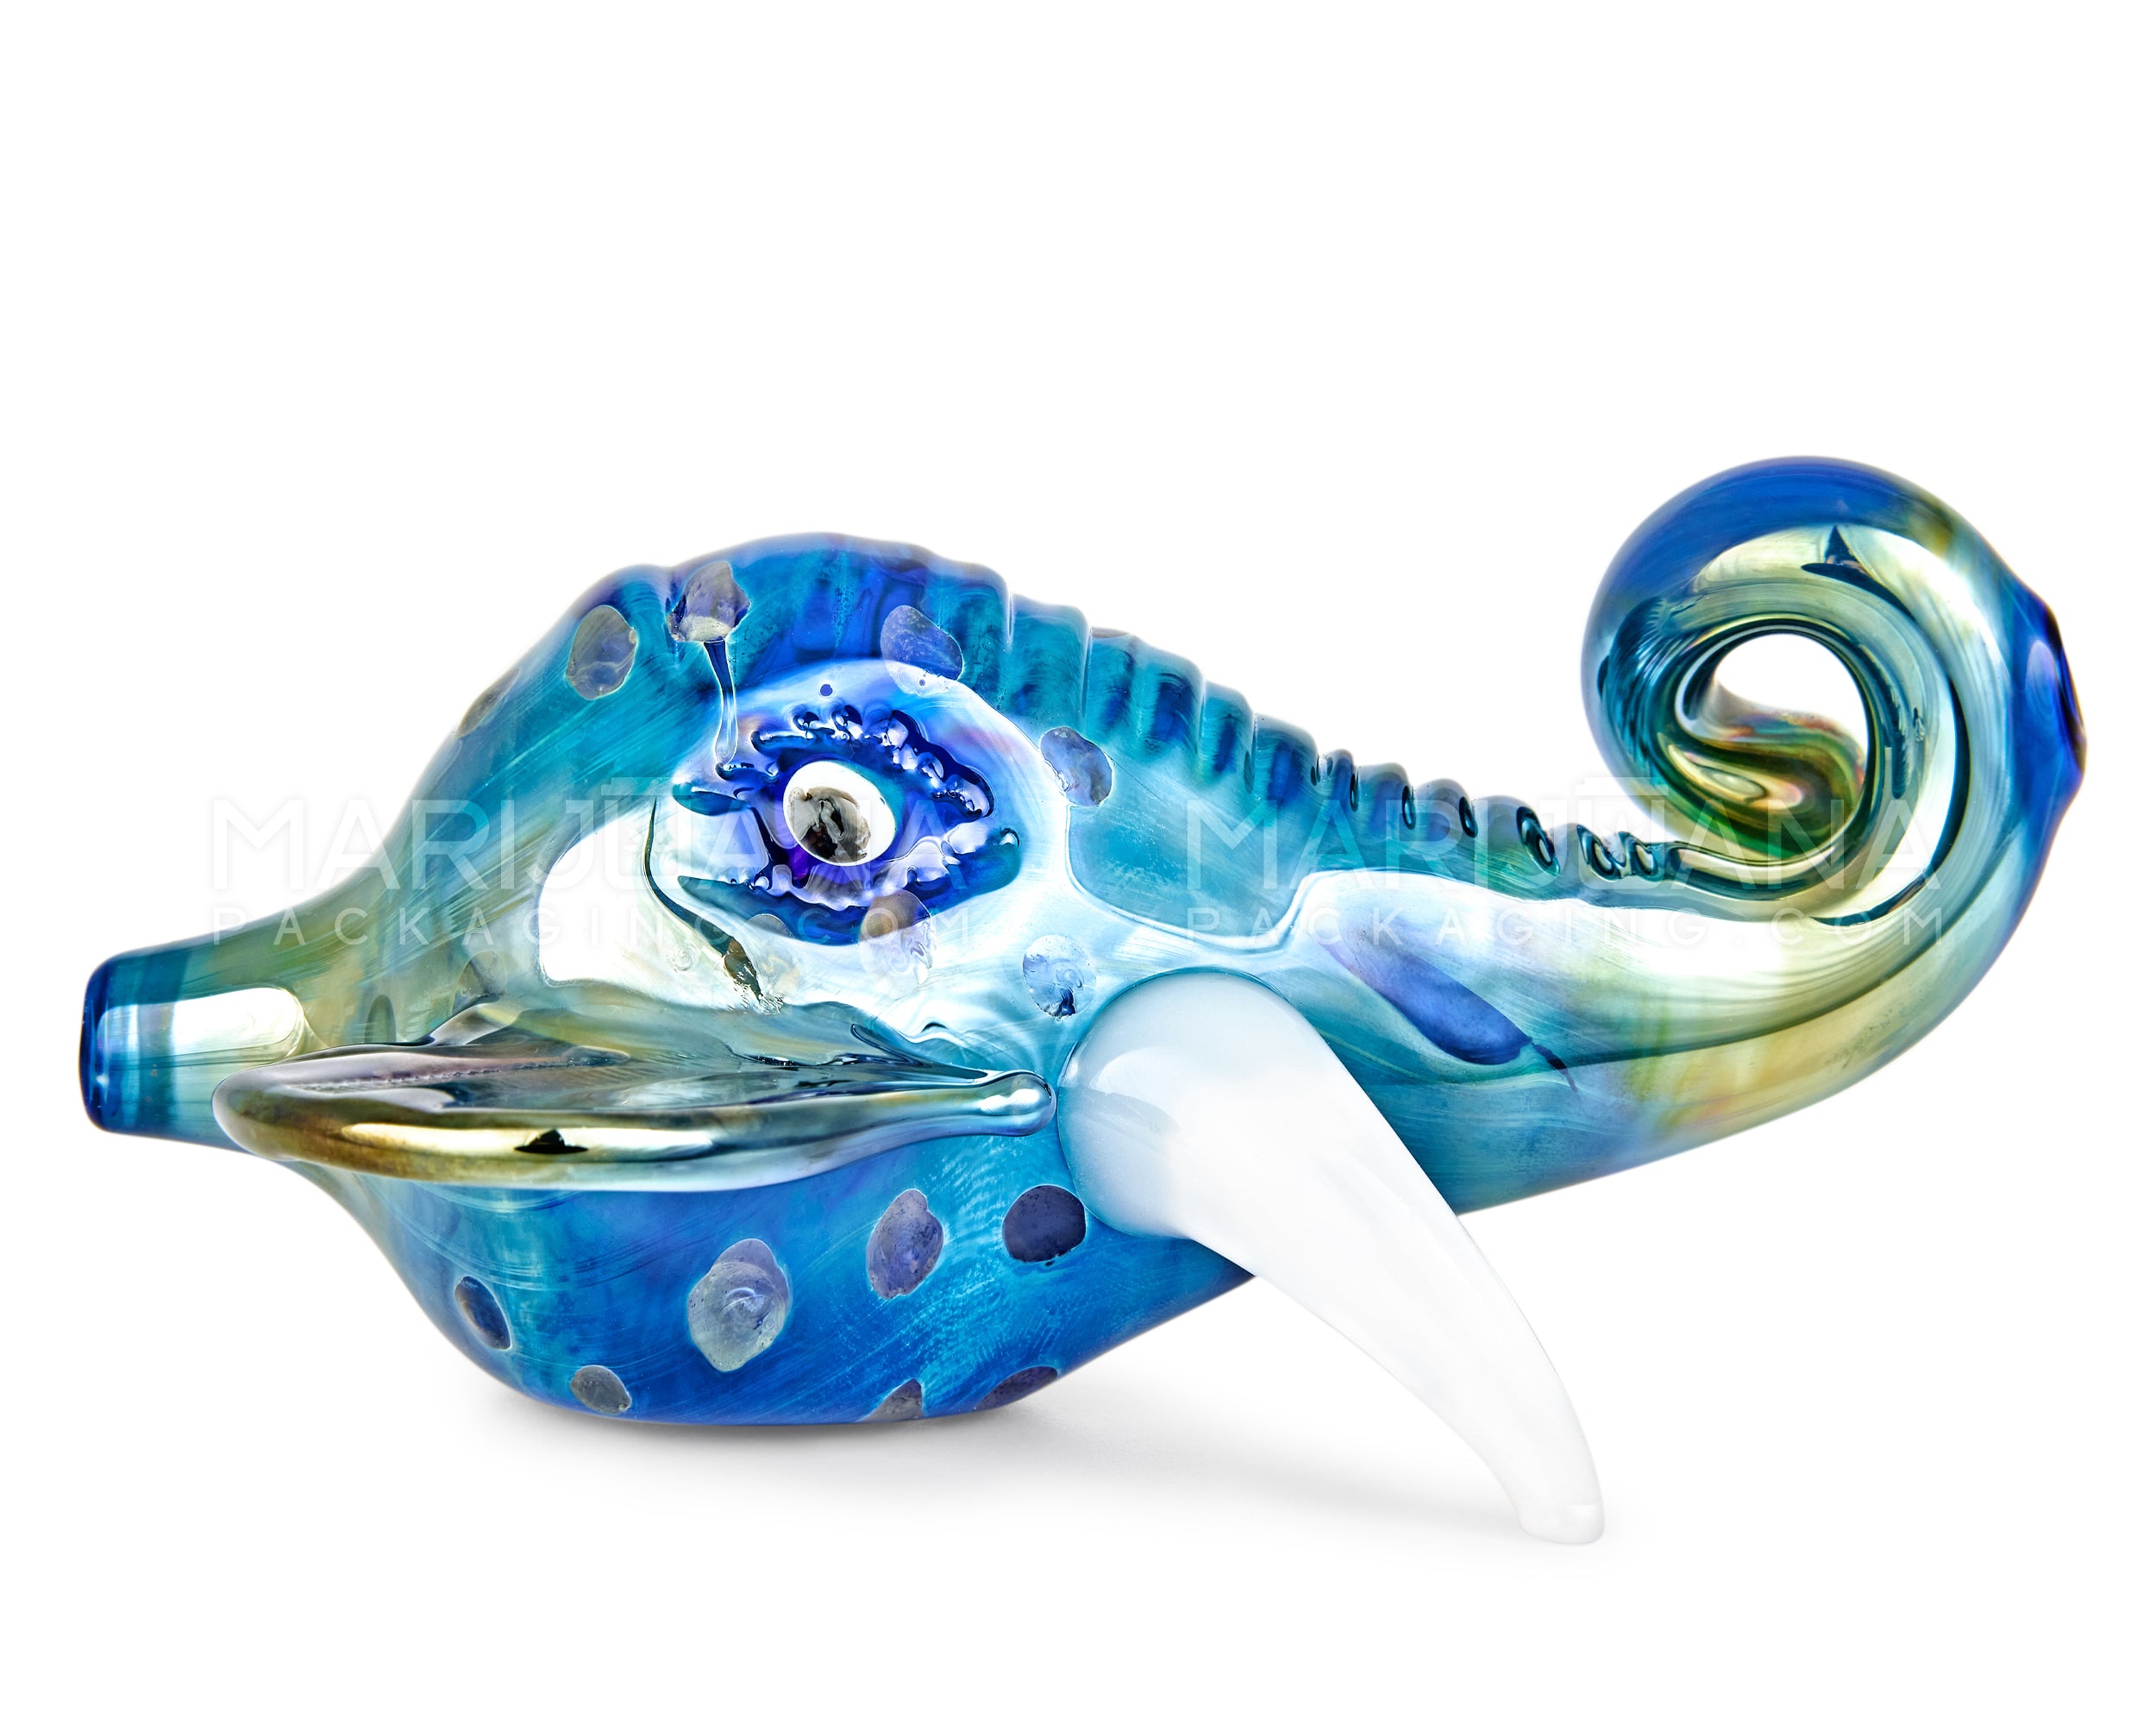 Metallic Coated Elephant Head Hand Pipe | 5in Long - Glass - Iridescent Blue - 7